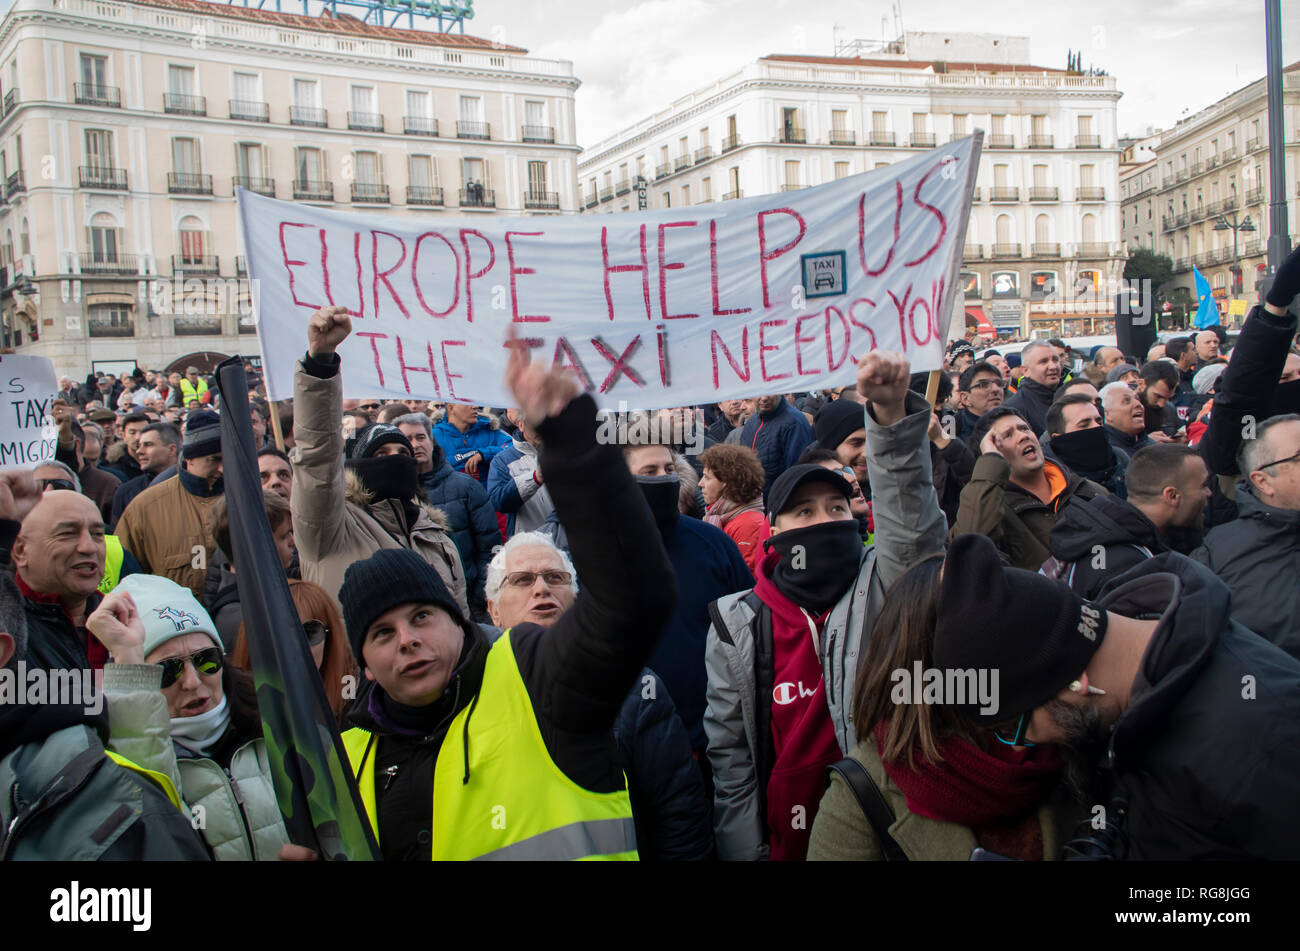 Madrid, Spain. 28th January 2019. Taxi drivers in Madrid have been on a strike for more than a week demanding the prohibition of Uber and Cabify in the Spanish capital-city.   Due to a lack of agreement, hundreds of taxi drivers protested at Puerta del Sol, Madrid’s central square.  In the picture taxi drivers are raising their fists to protest. Credit: Lora Grigorova/Alamy Live News Stock Photo